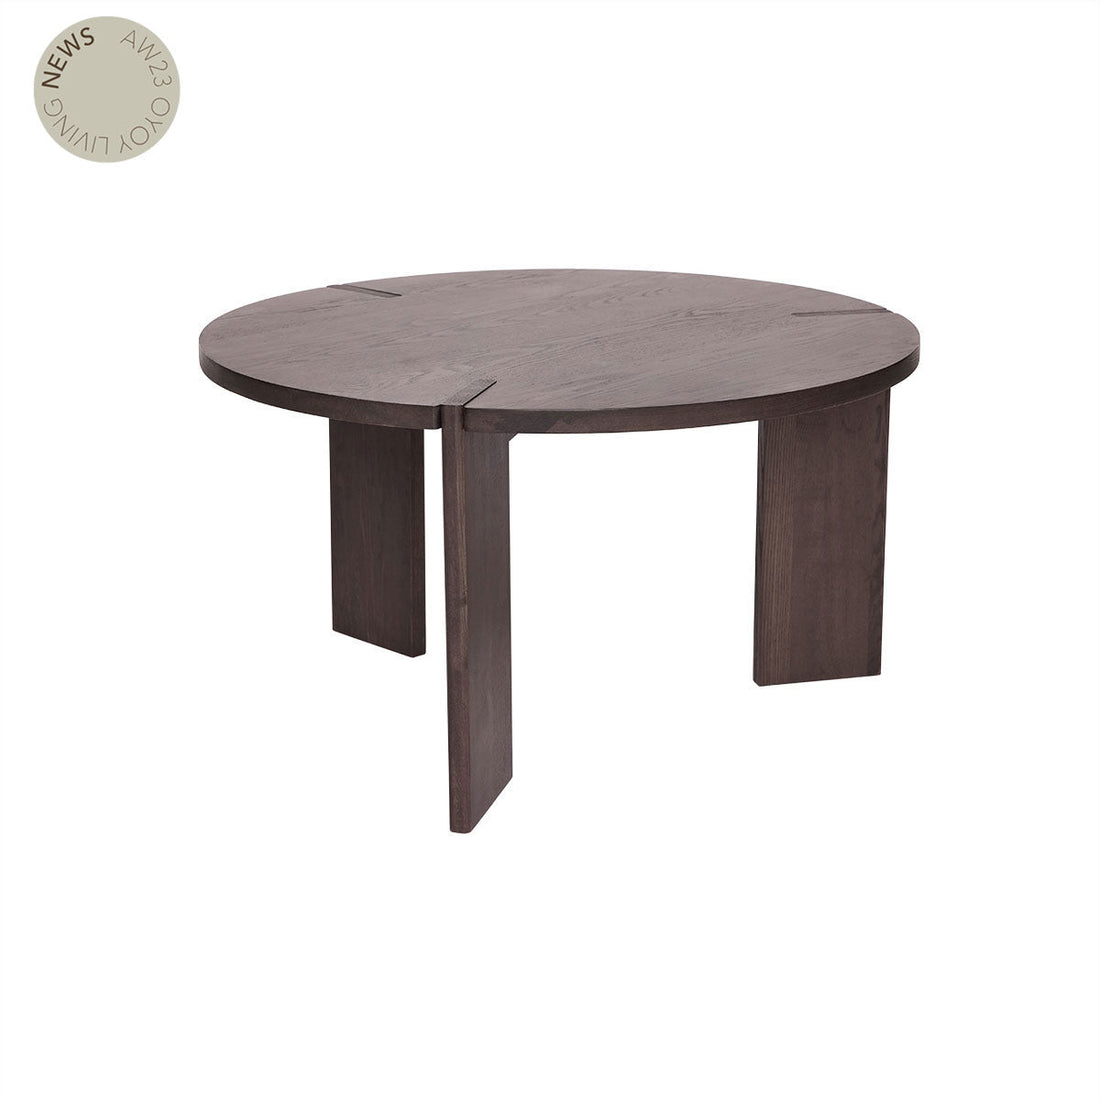 Oyoy Living Oy Coft Table - Small